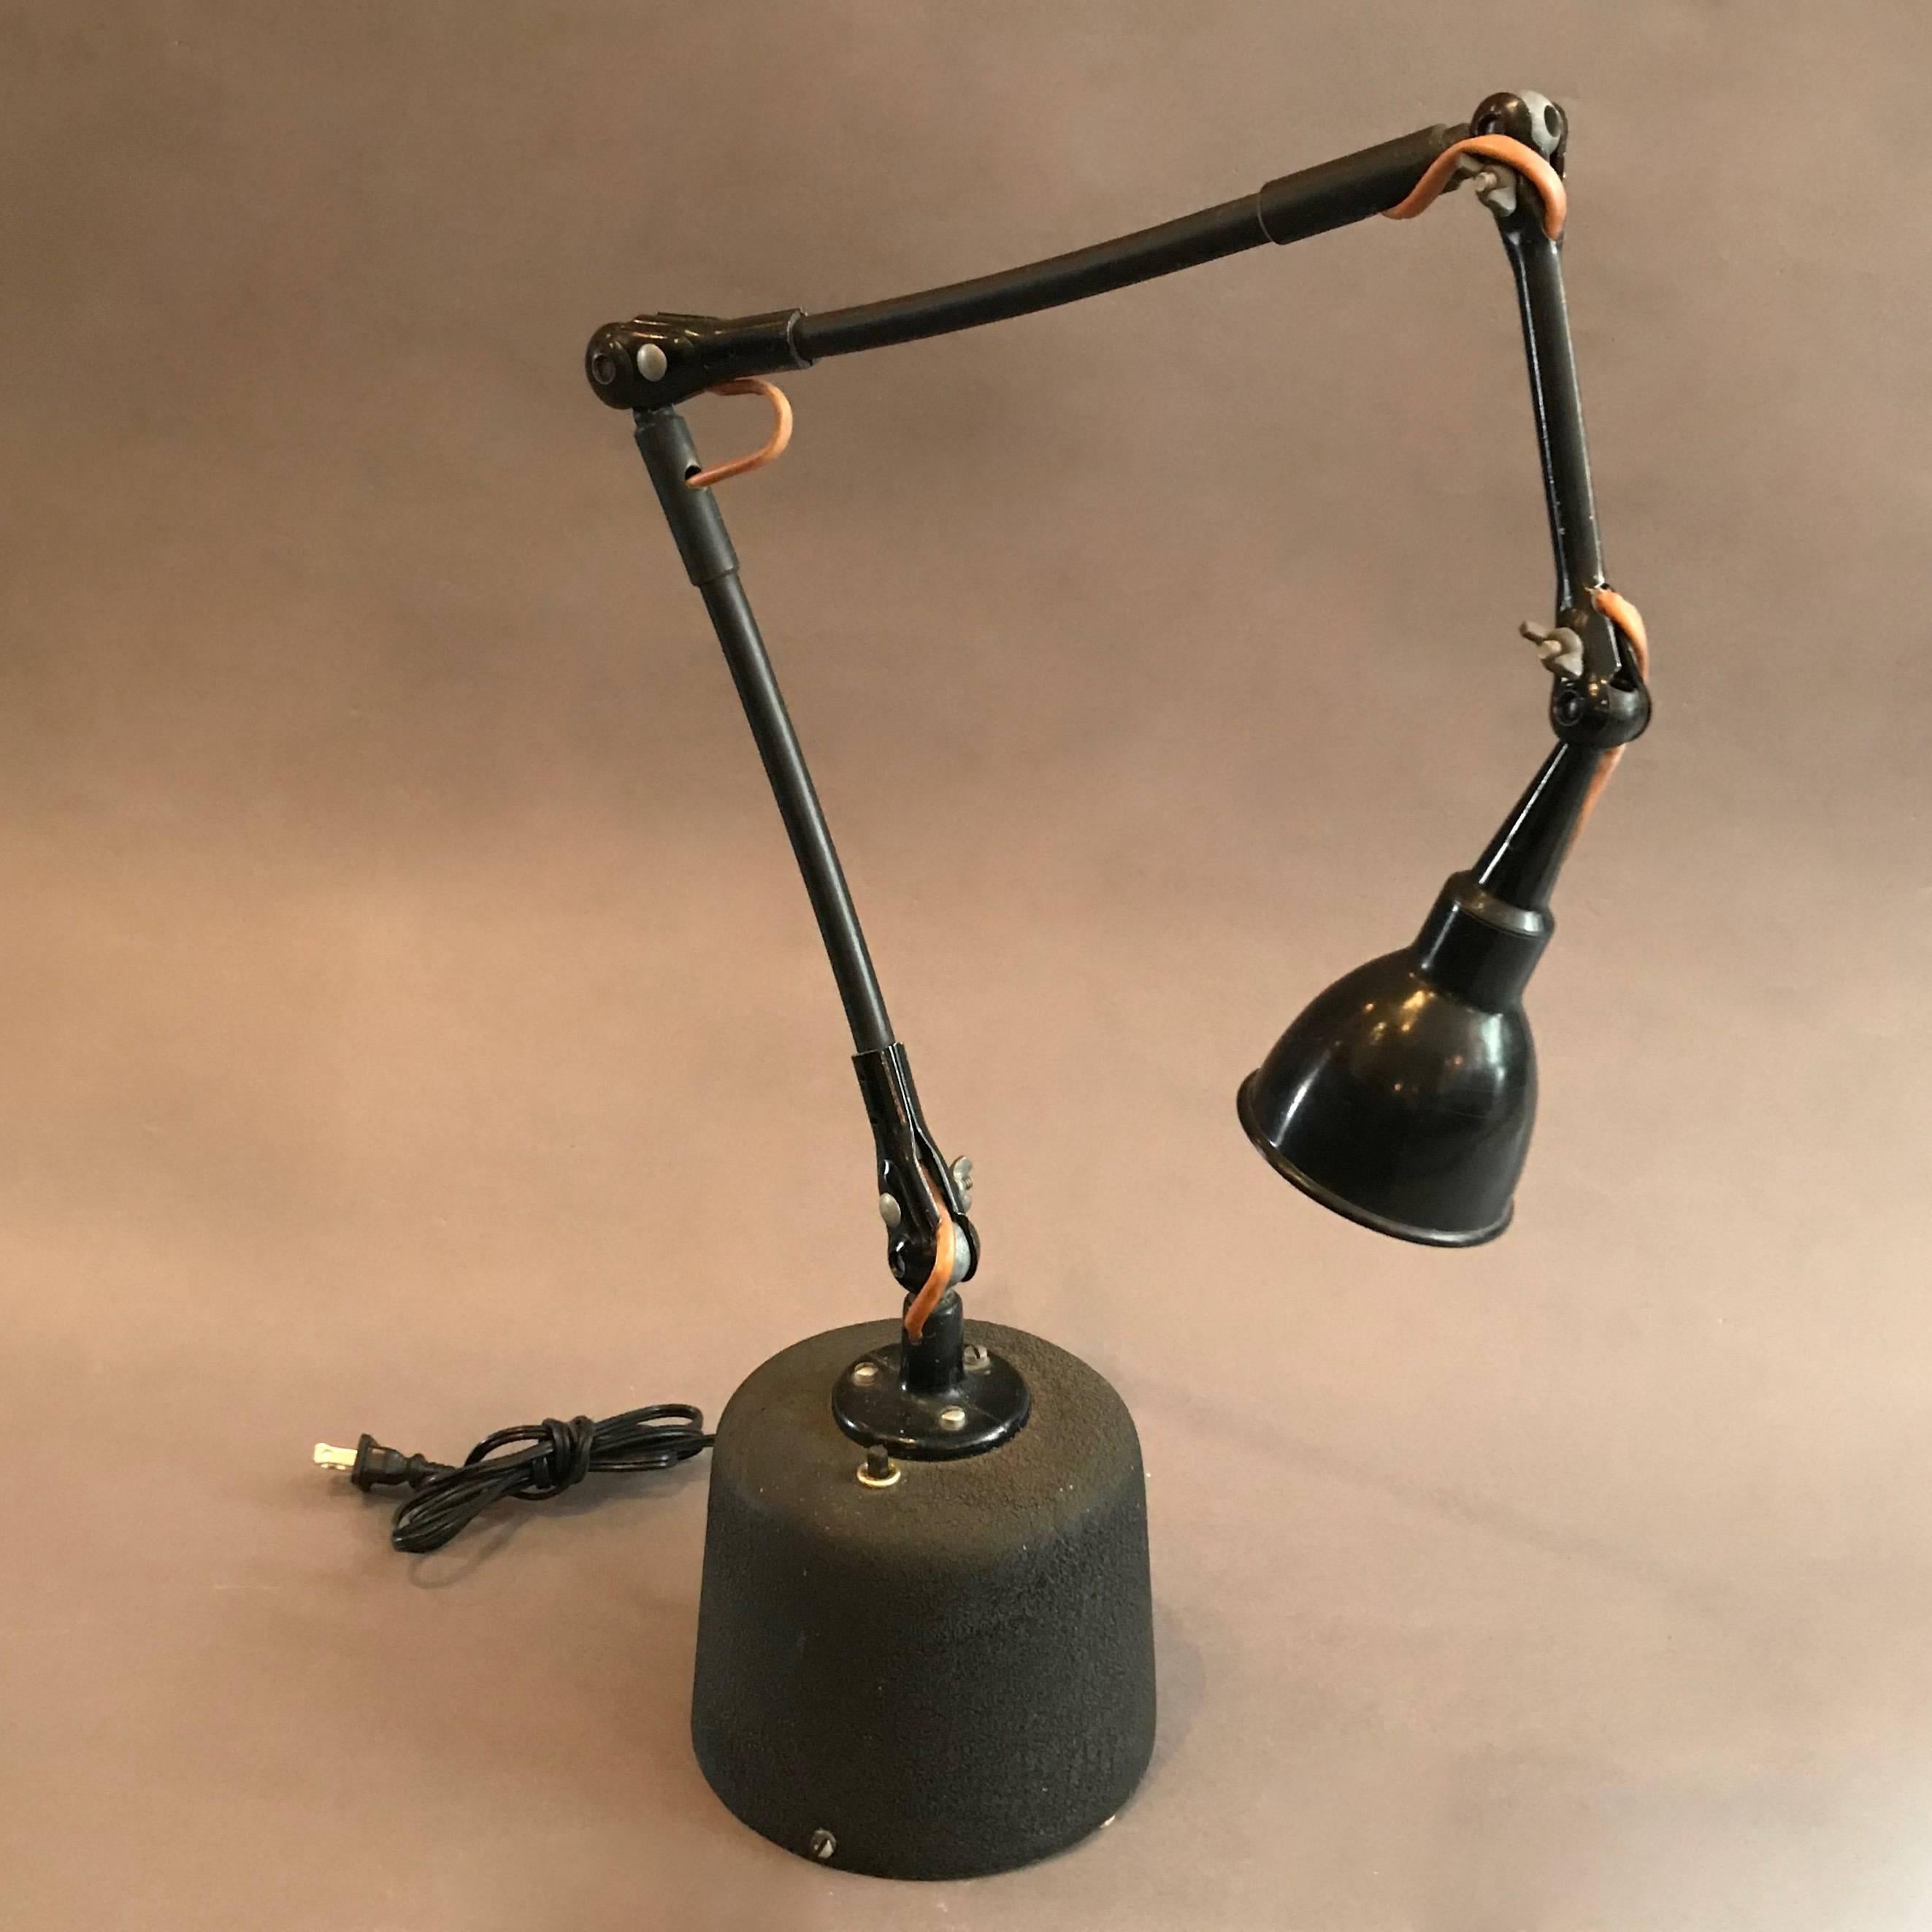 Industrial, tabletop, military airplane navigation, task lamp features a 6.25 inch diameter x 5.5 inch height cast metal, shrink paint base, that houses a low voltage transformer, and a 36 inch long arm that articulates at four joints. The lamp